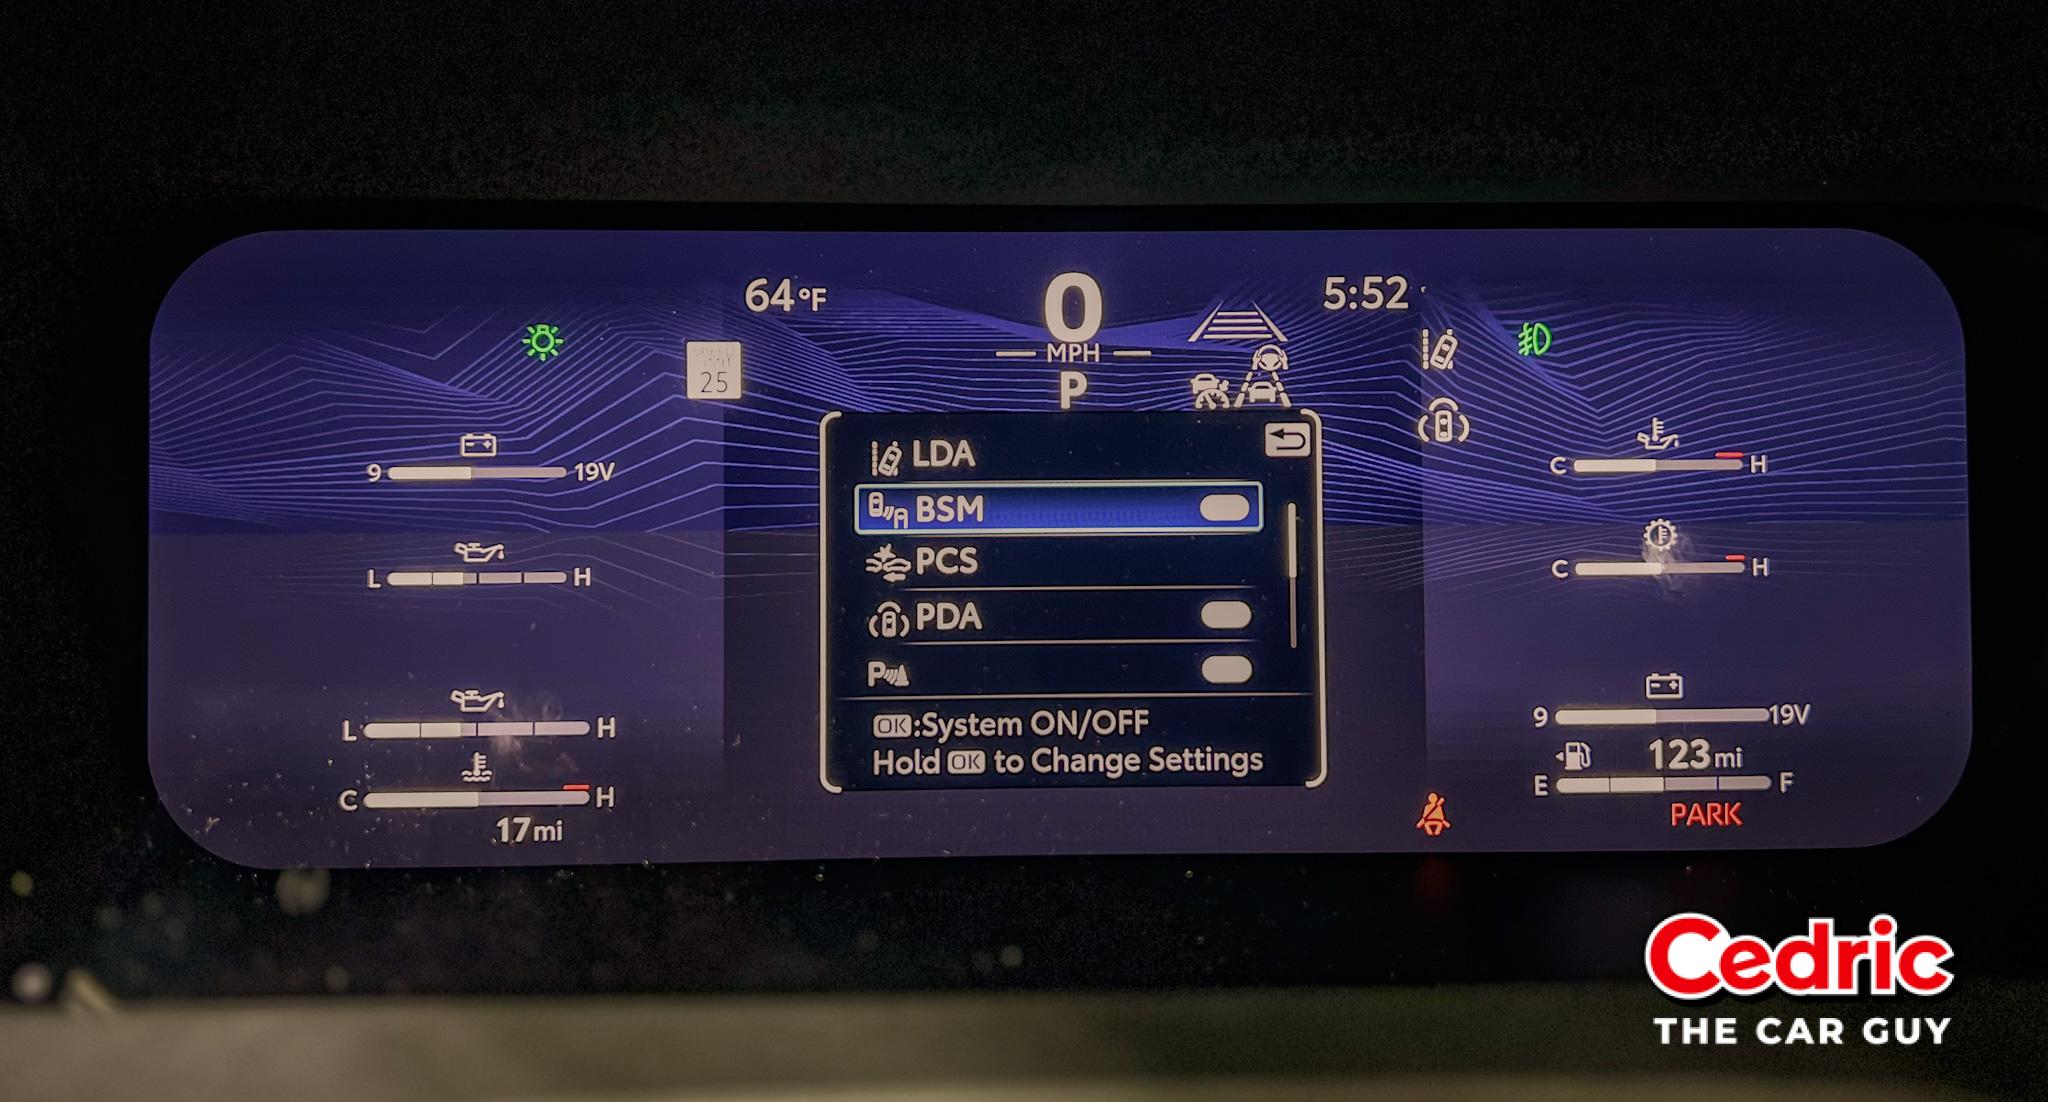 7-inch MID shows the Toyota Blind Spot Monitor toggle status by highlighting a car beside another car with two curvy lines